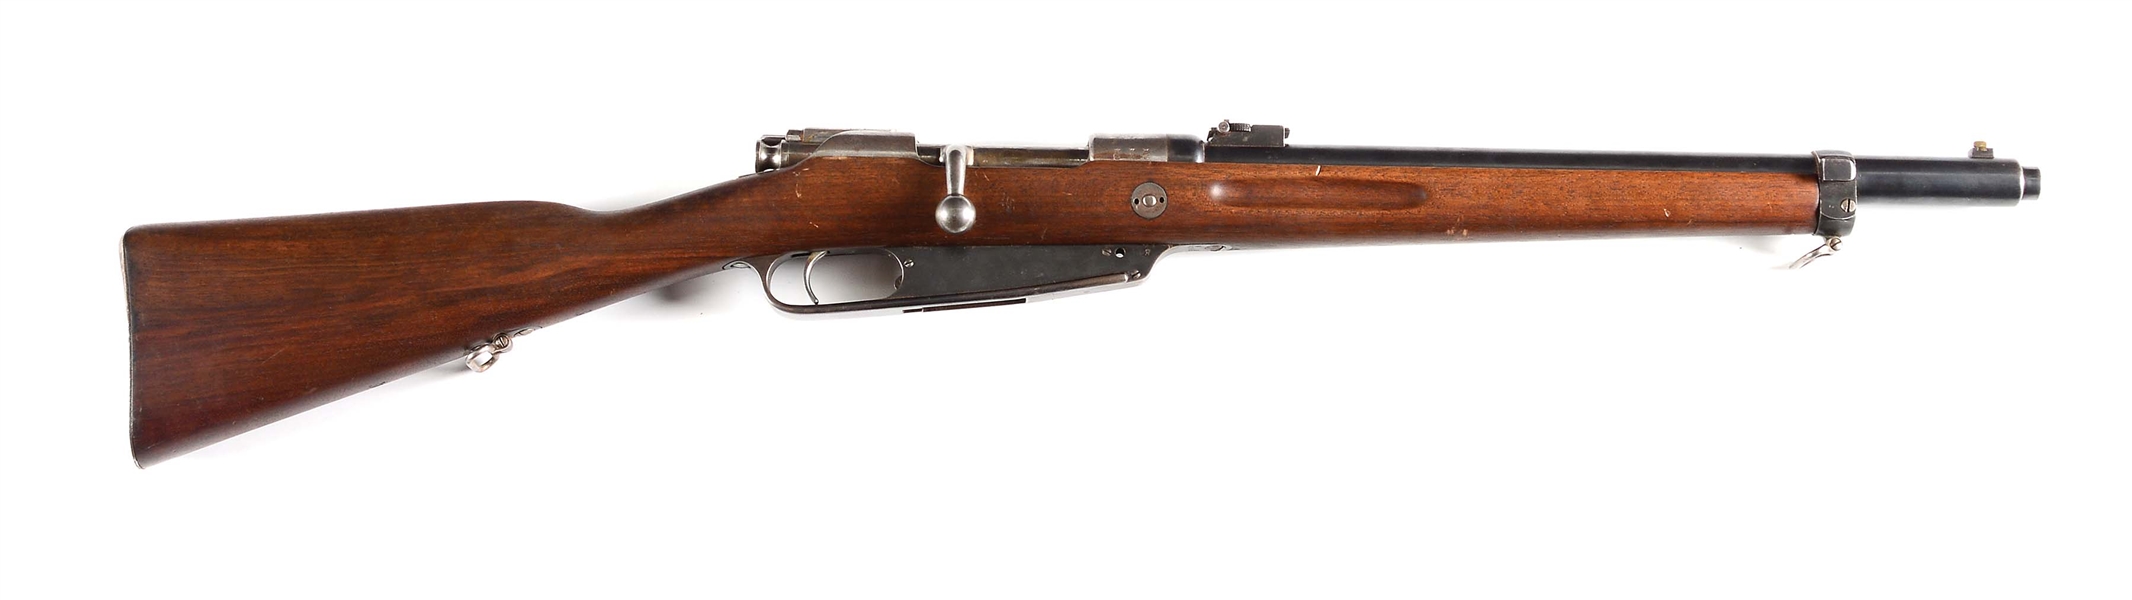 (A) UNUSUAL COMMERCIALLY PROOFED GEWEHR 88 BOLT ACTION CARBINE.